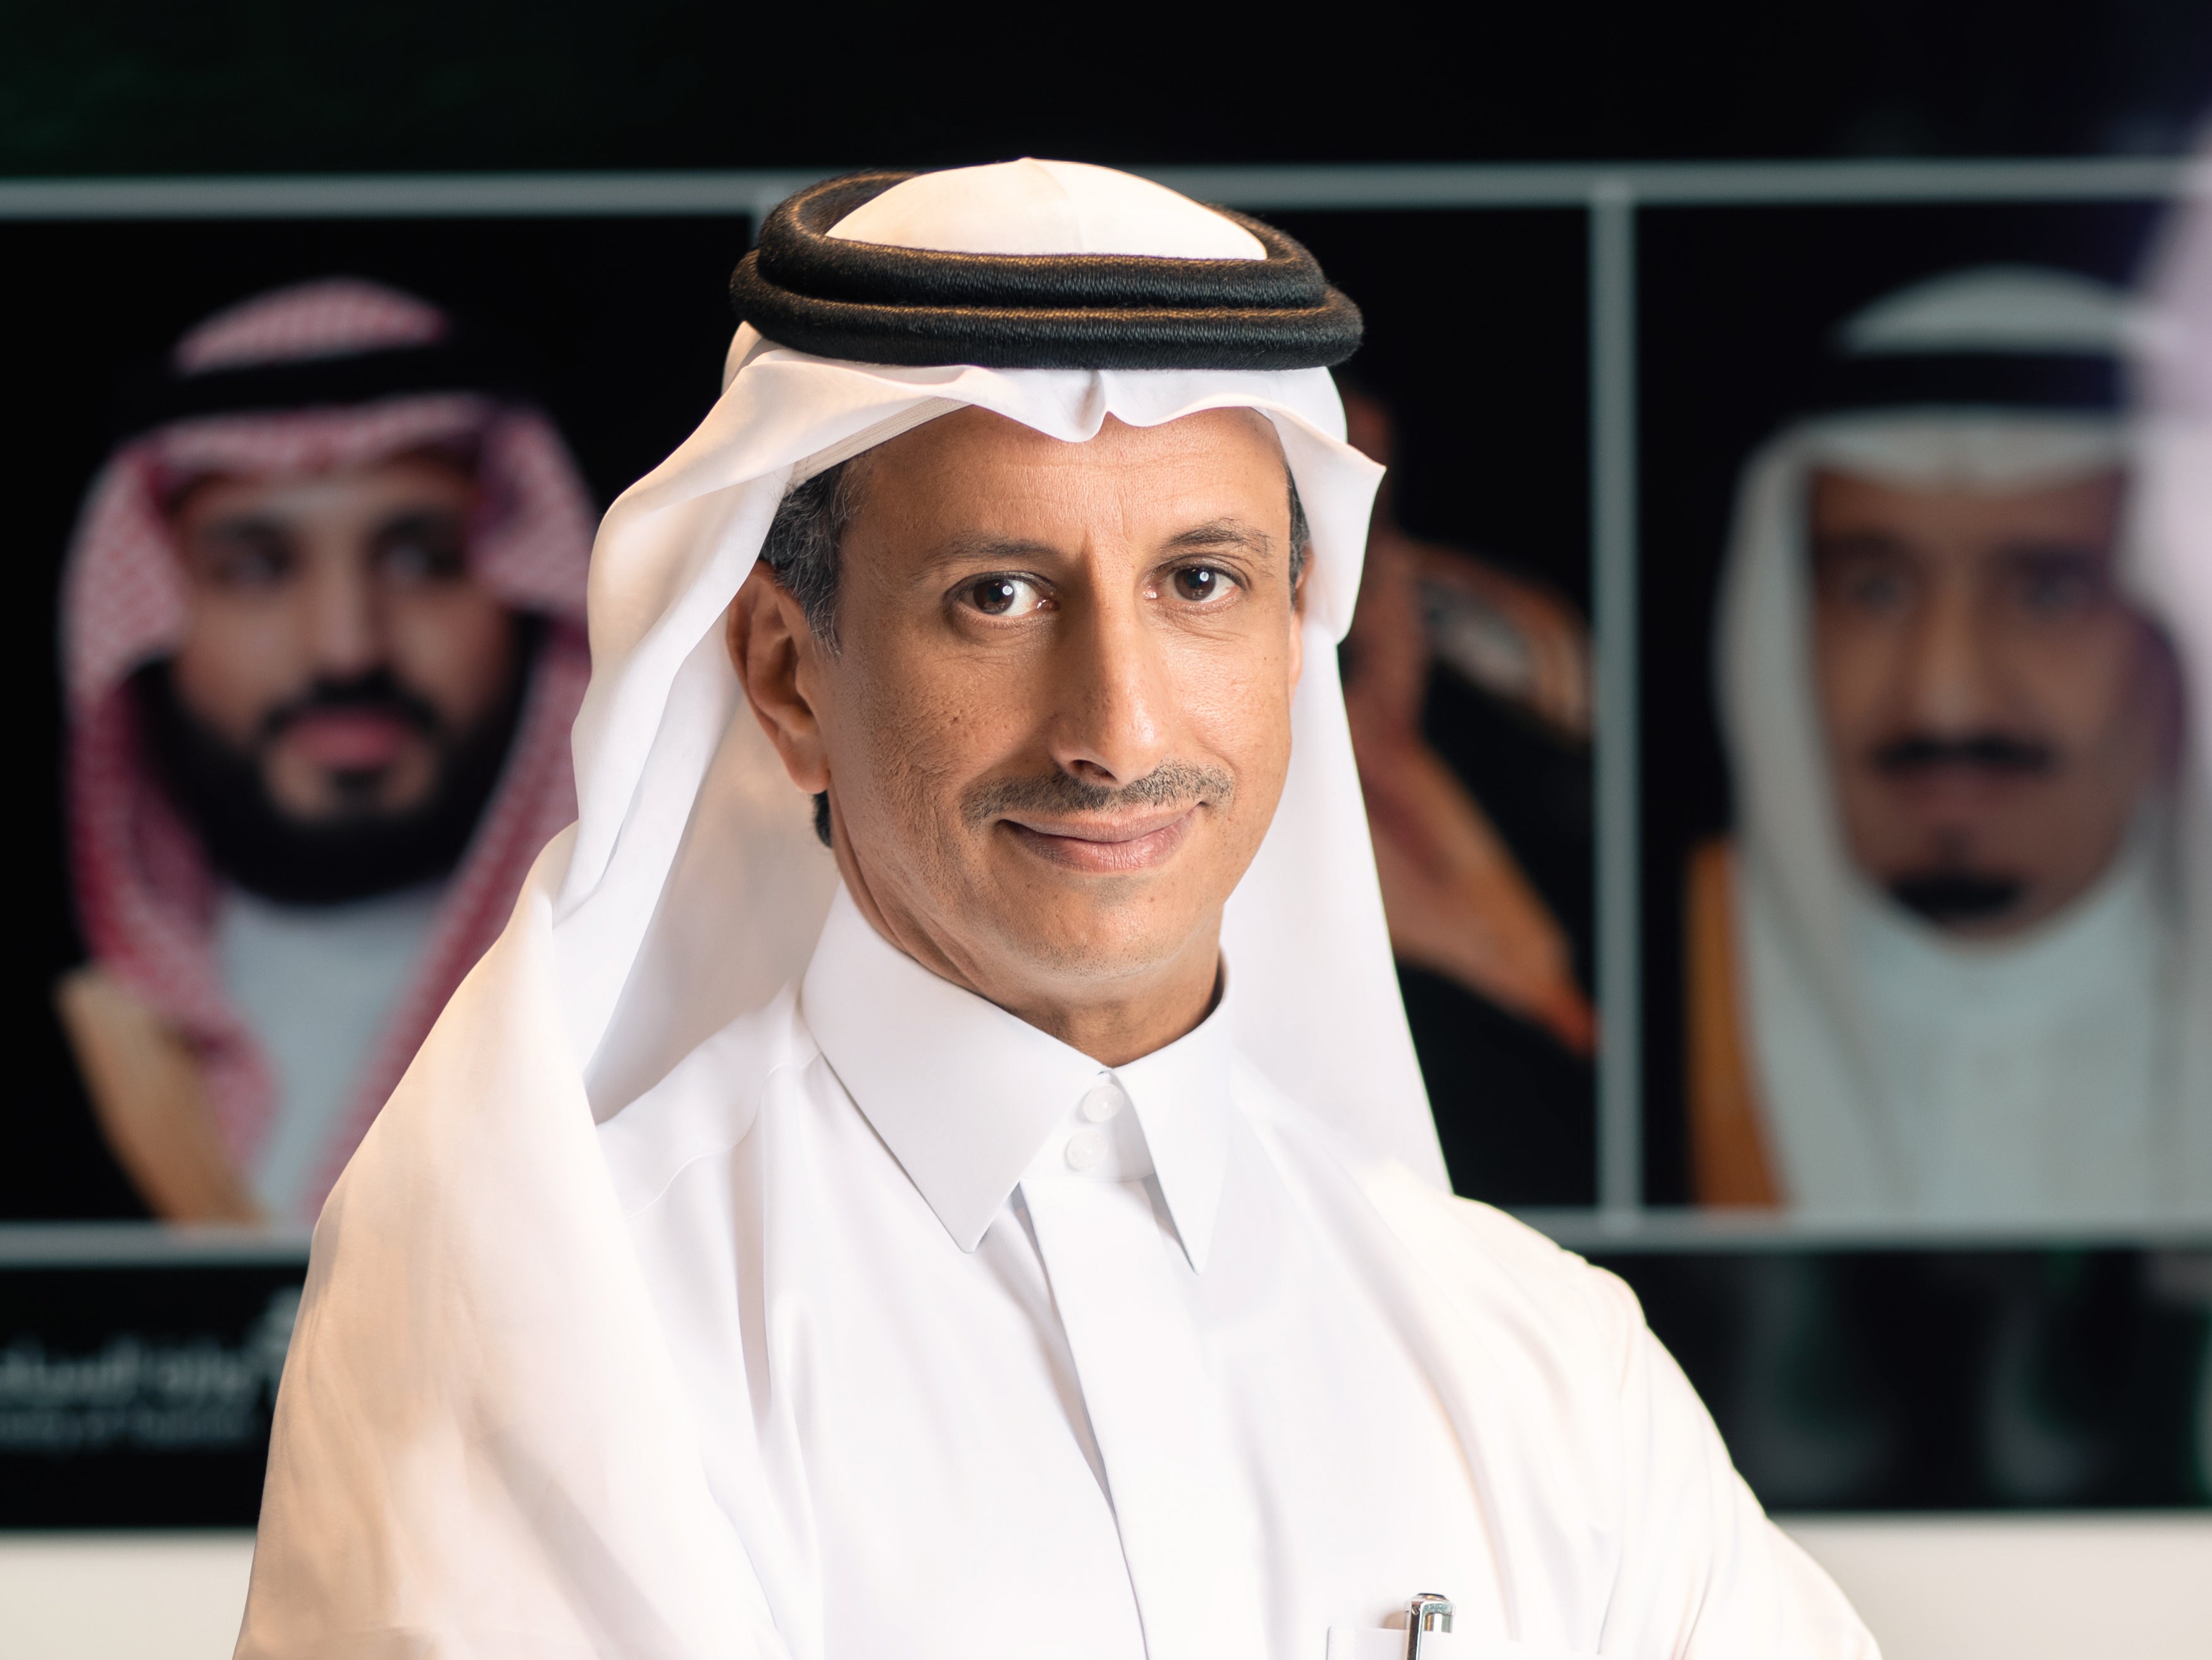 Man on a mission: His Excellency Ahmed Al Khateeb, Saudi minister of tourism